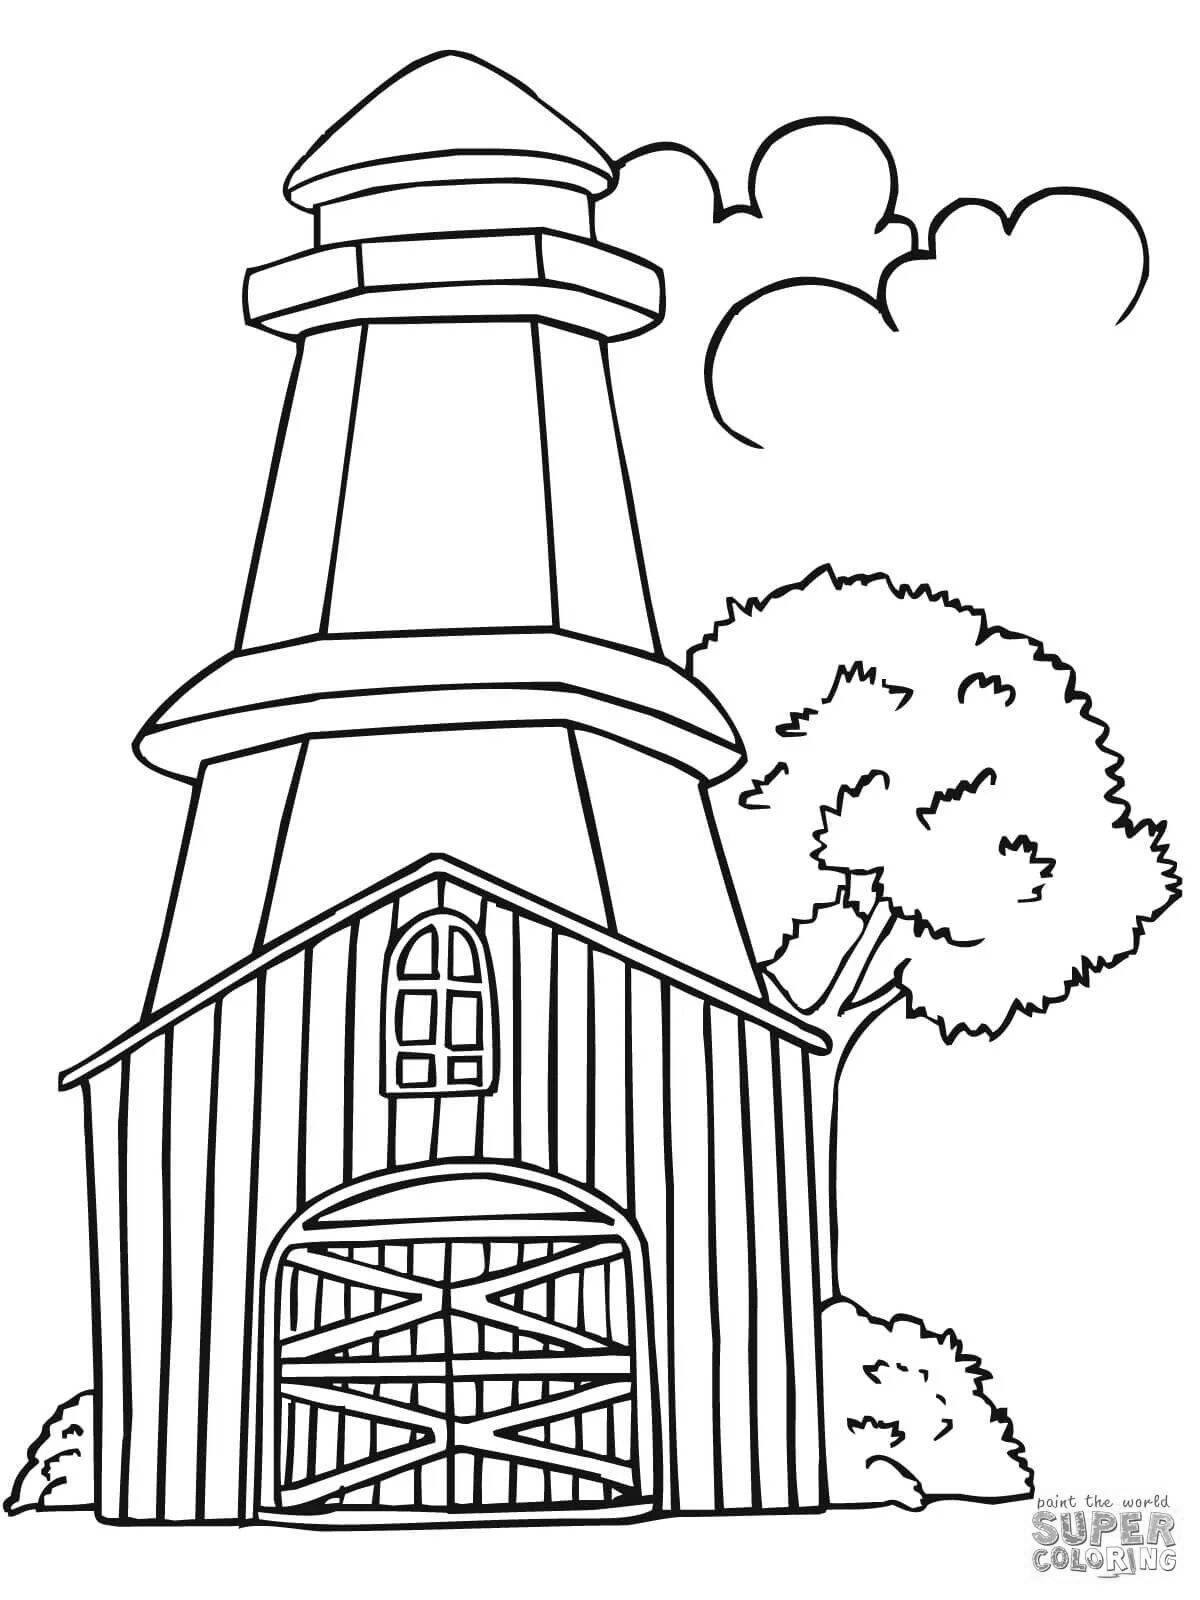 Shiny lighthouse coloring book for kids